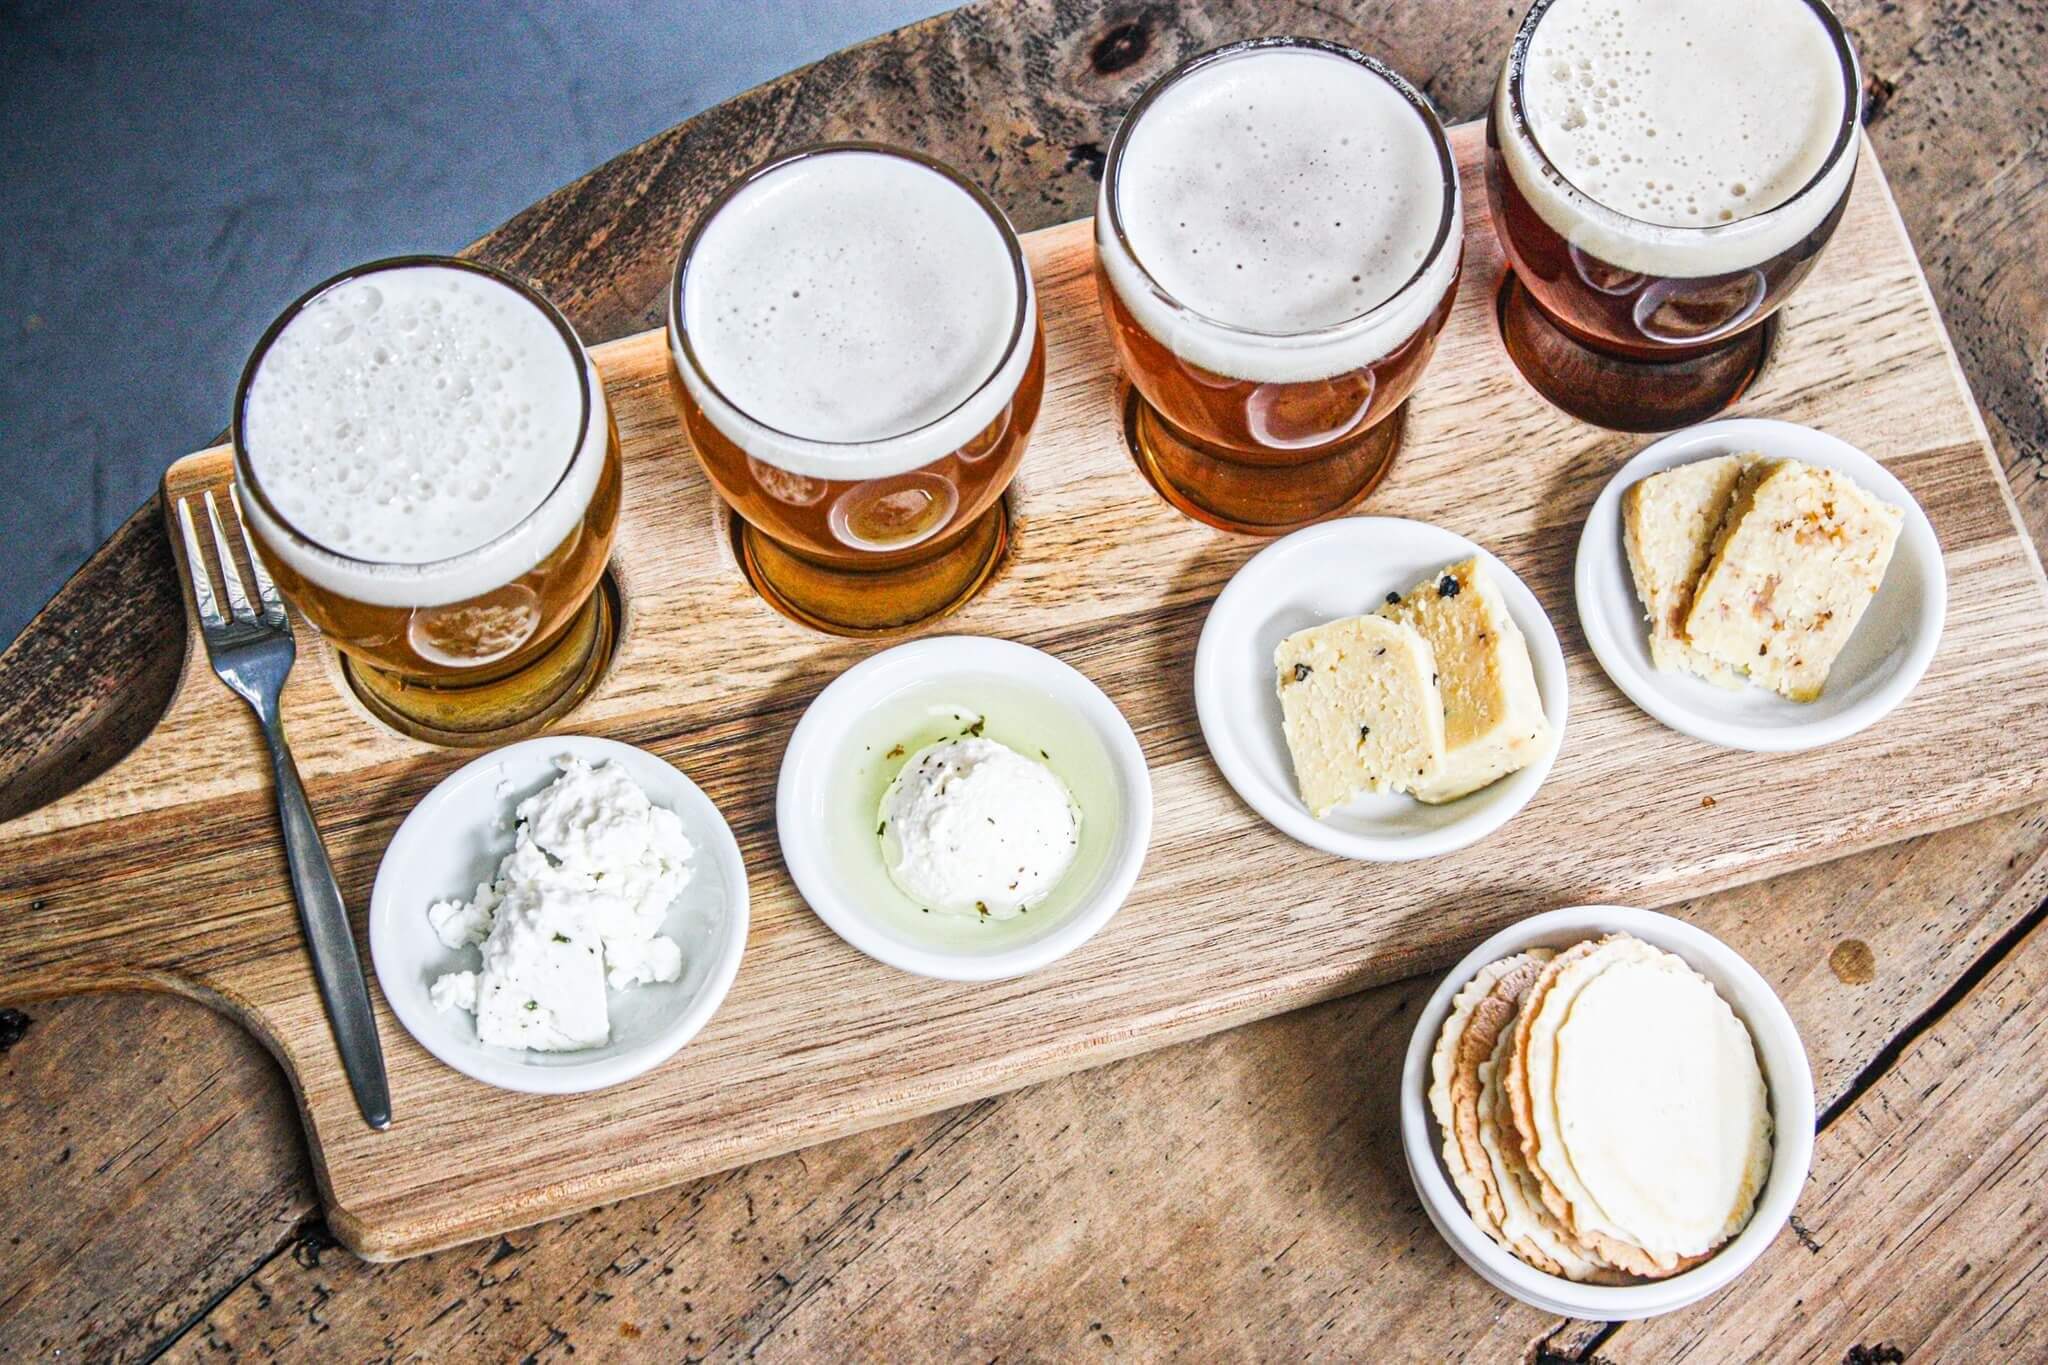 beer and cheese matching platter